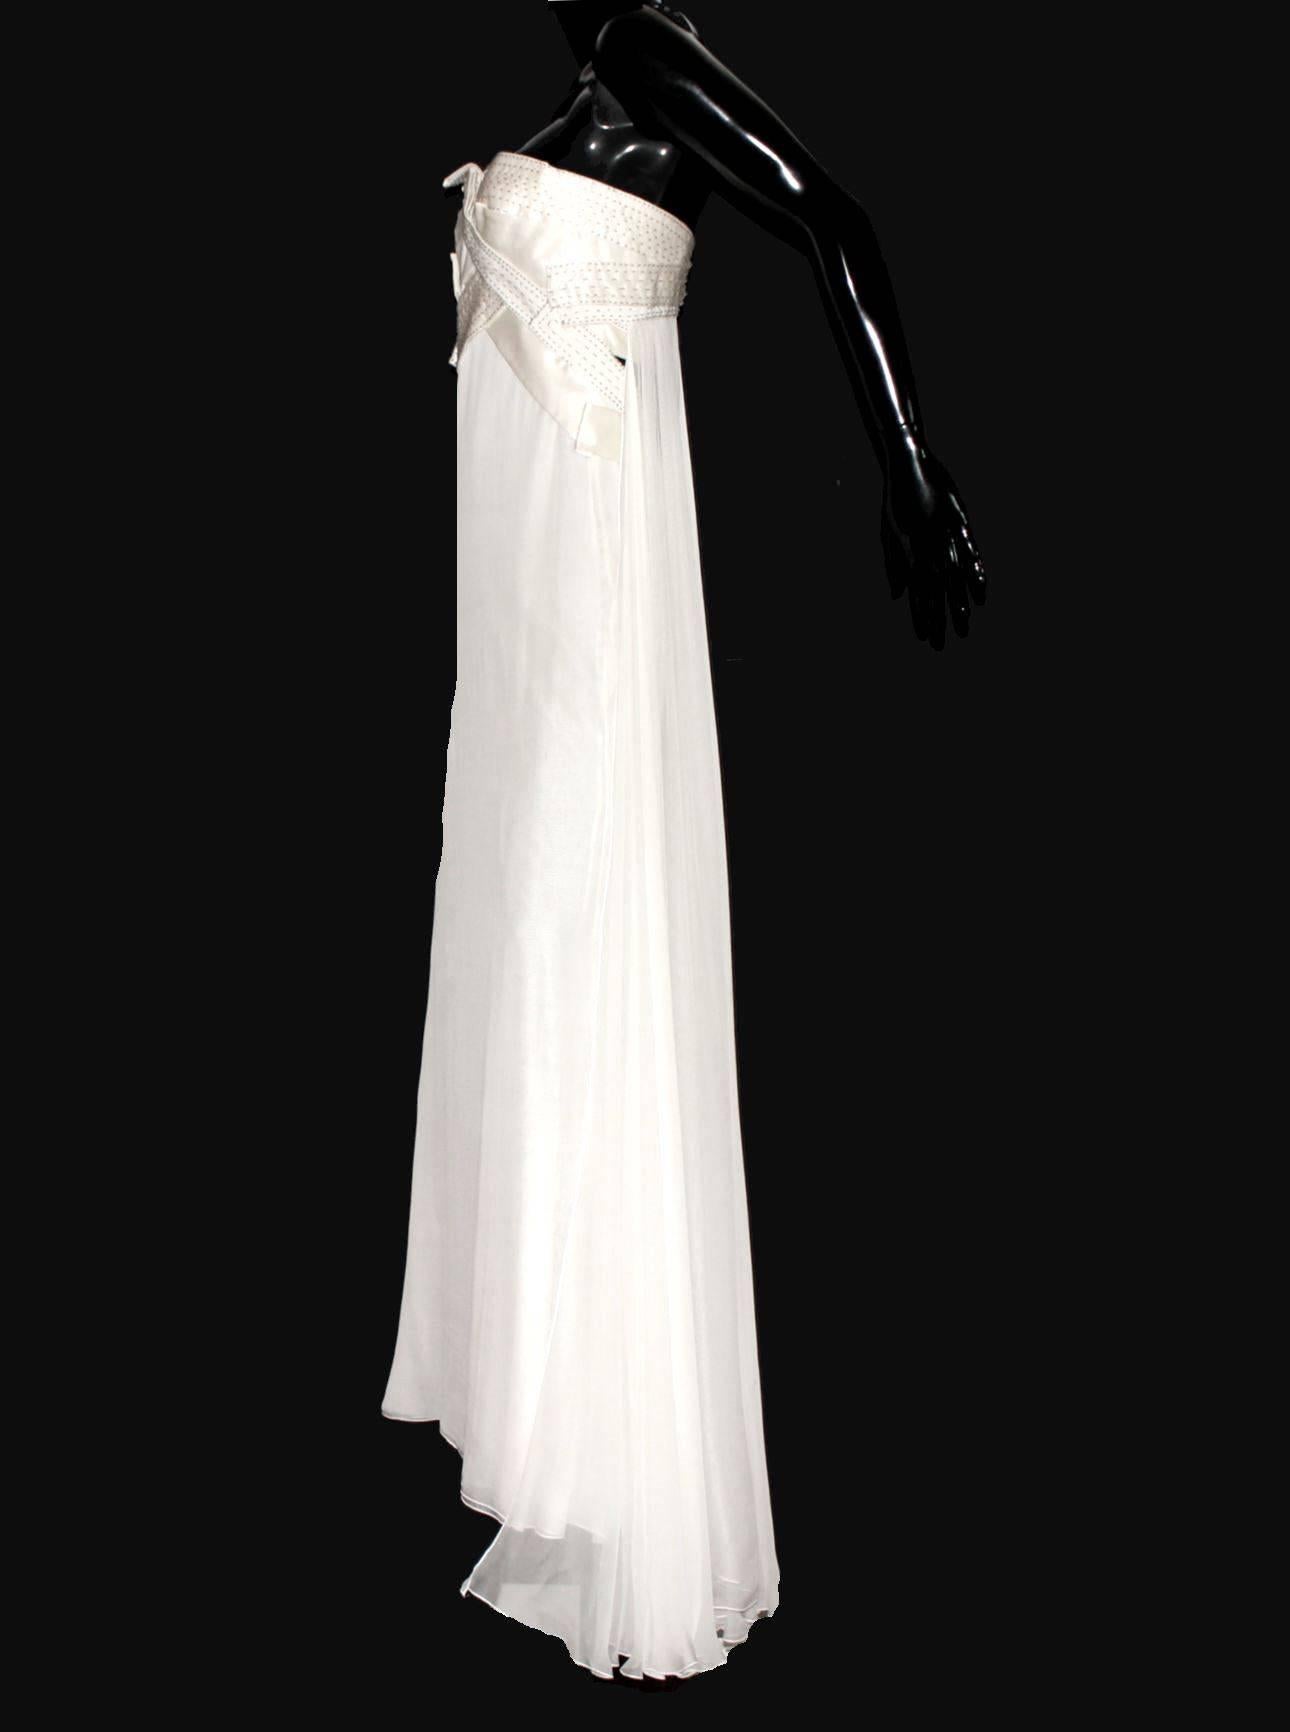 INCREDIBLE

VERSACE

GRECIAN GODDESS
WHITE SILK BEADED EVENING GOWN





    Gorgeous off-white evening gown inspired by the Grecian goddesses by VERSACE
    Strapless with sexy semi-open back decollete
    Beautiful details with discreet